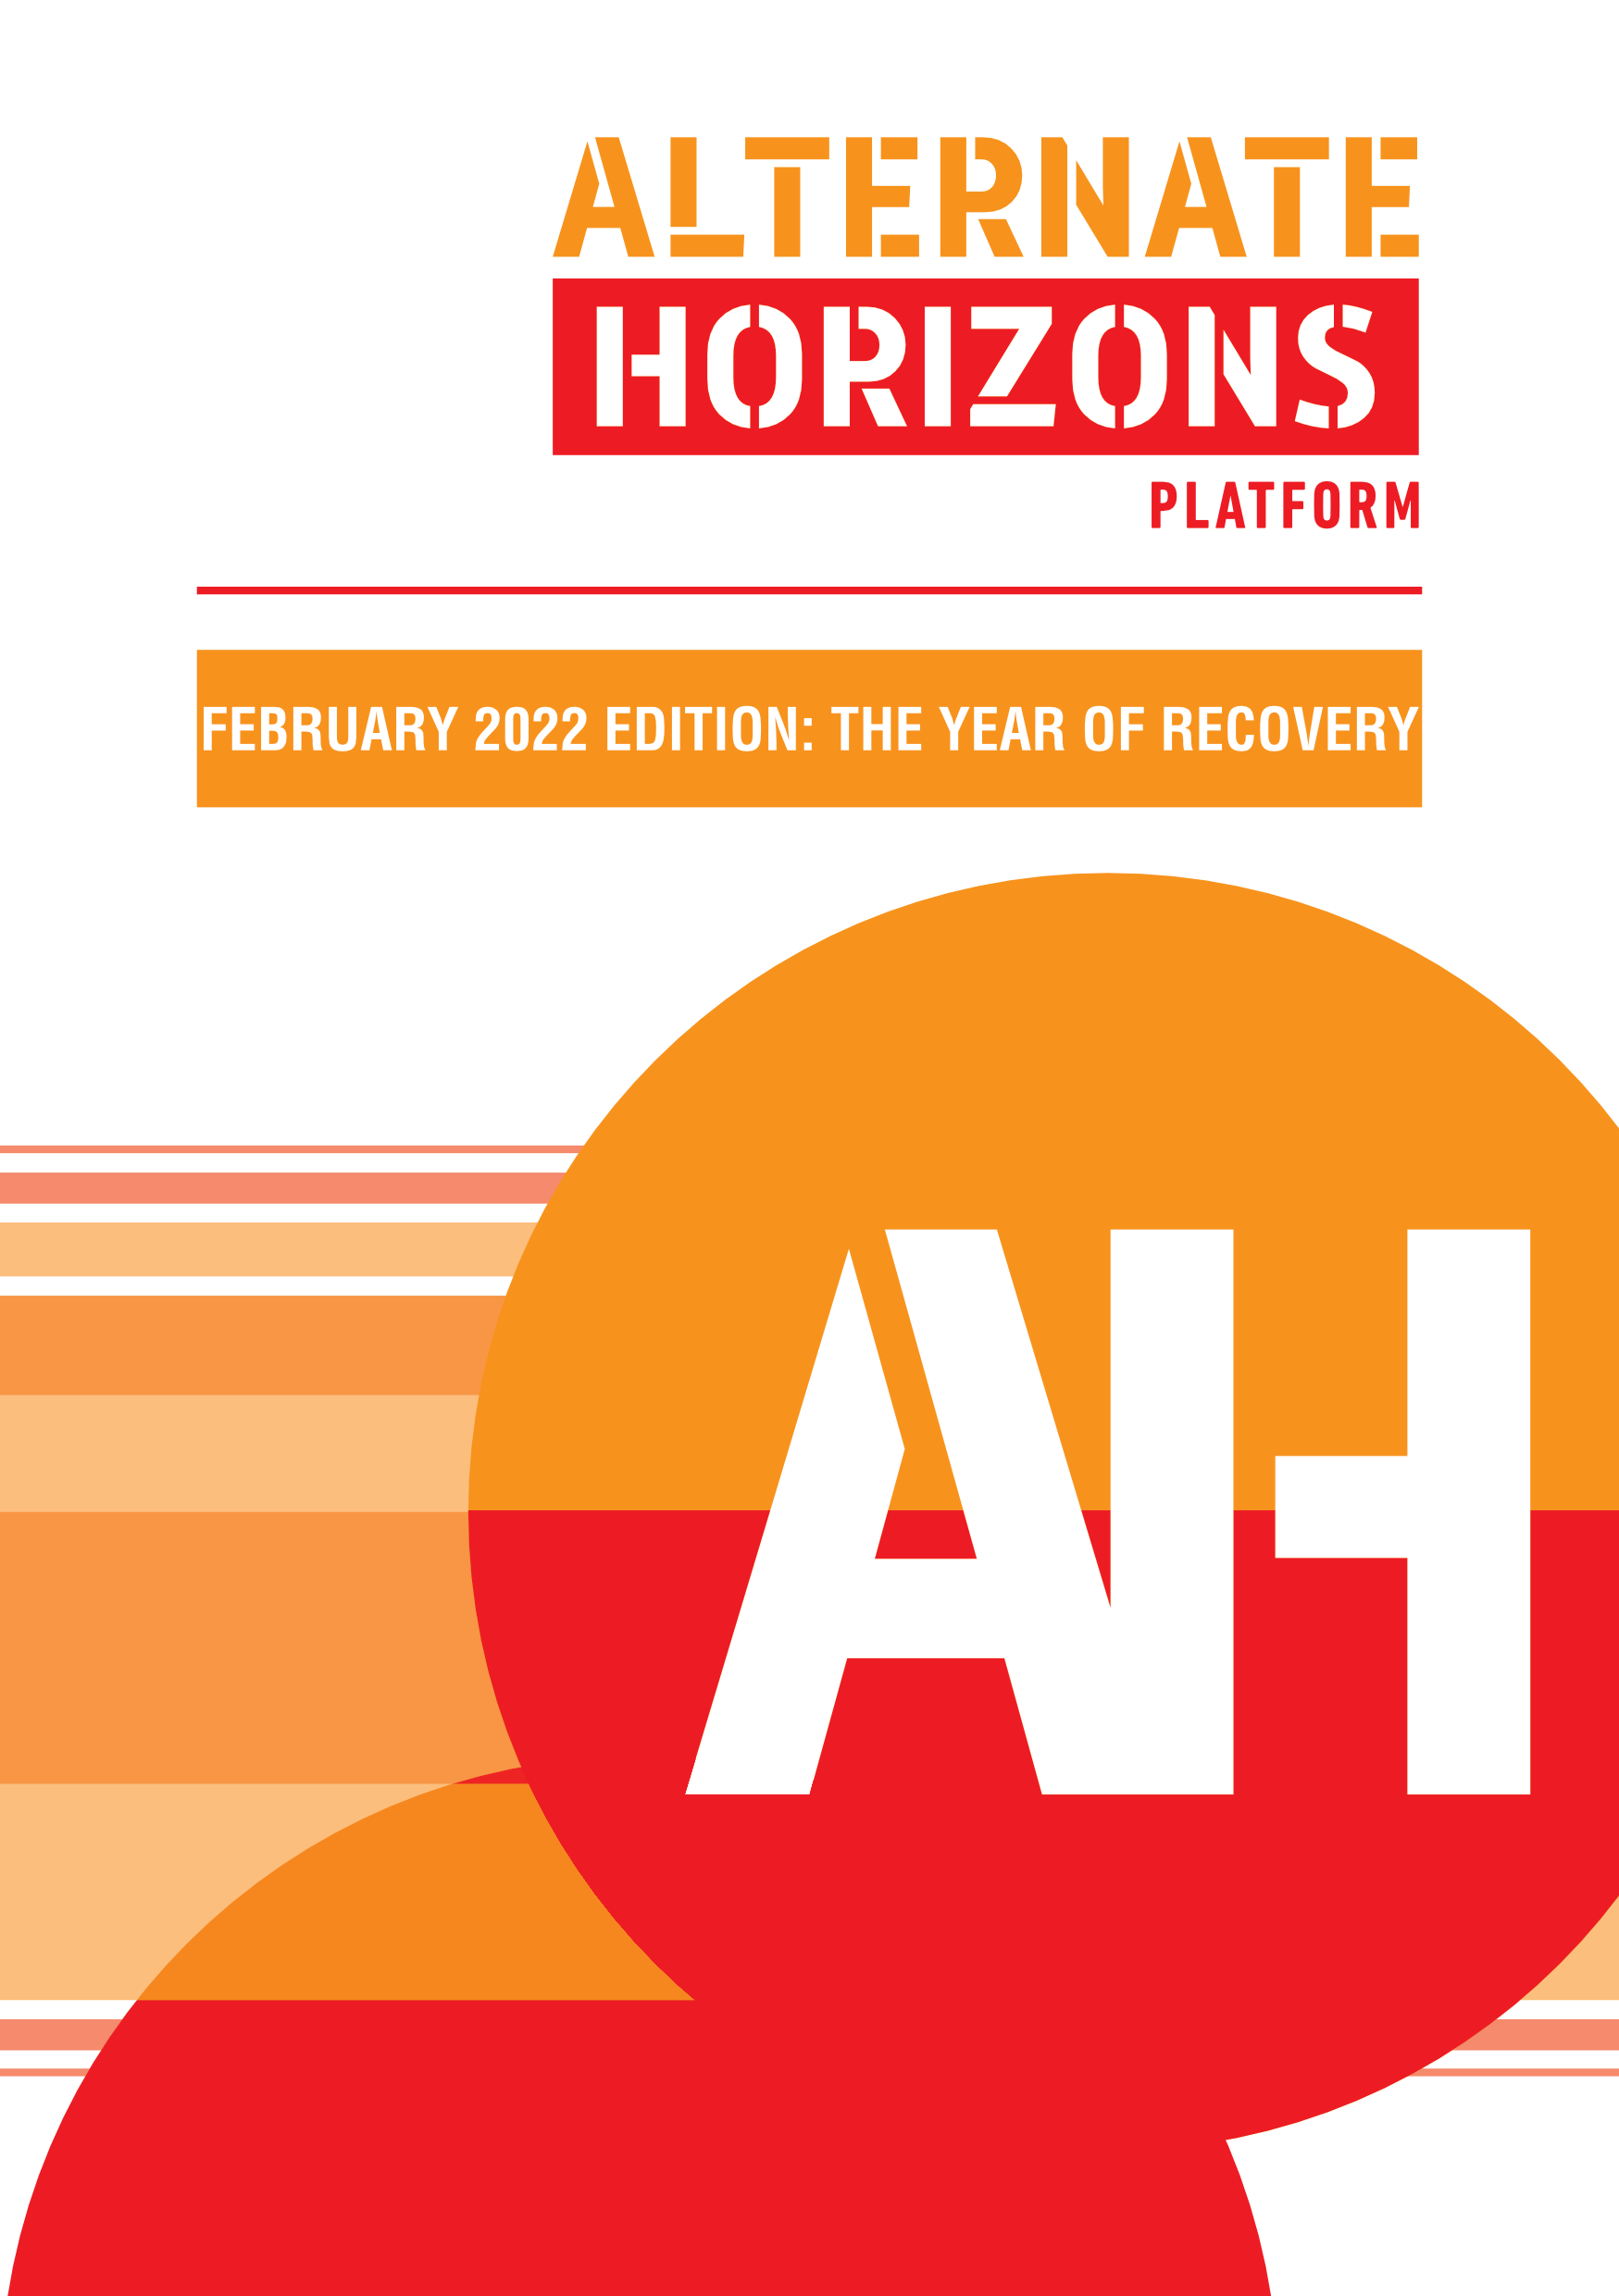 					View 2022: The Year of Recovery
				